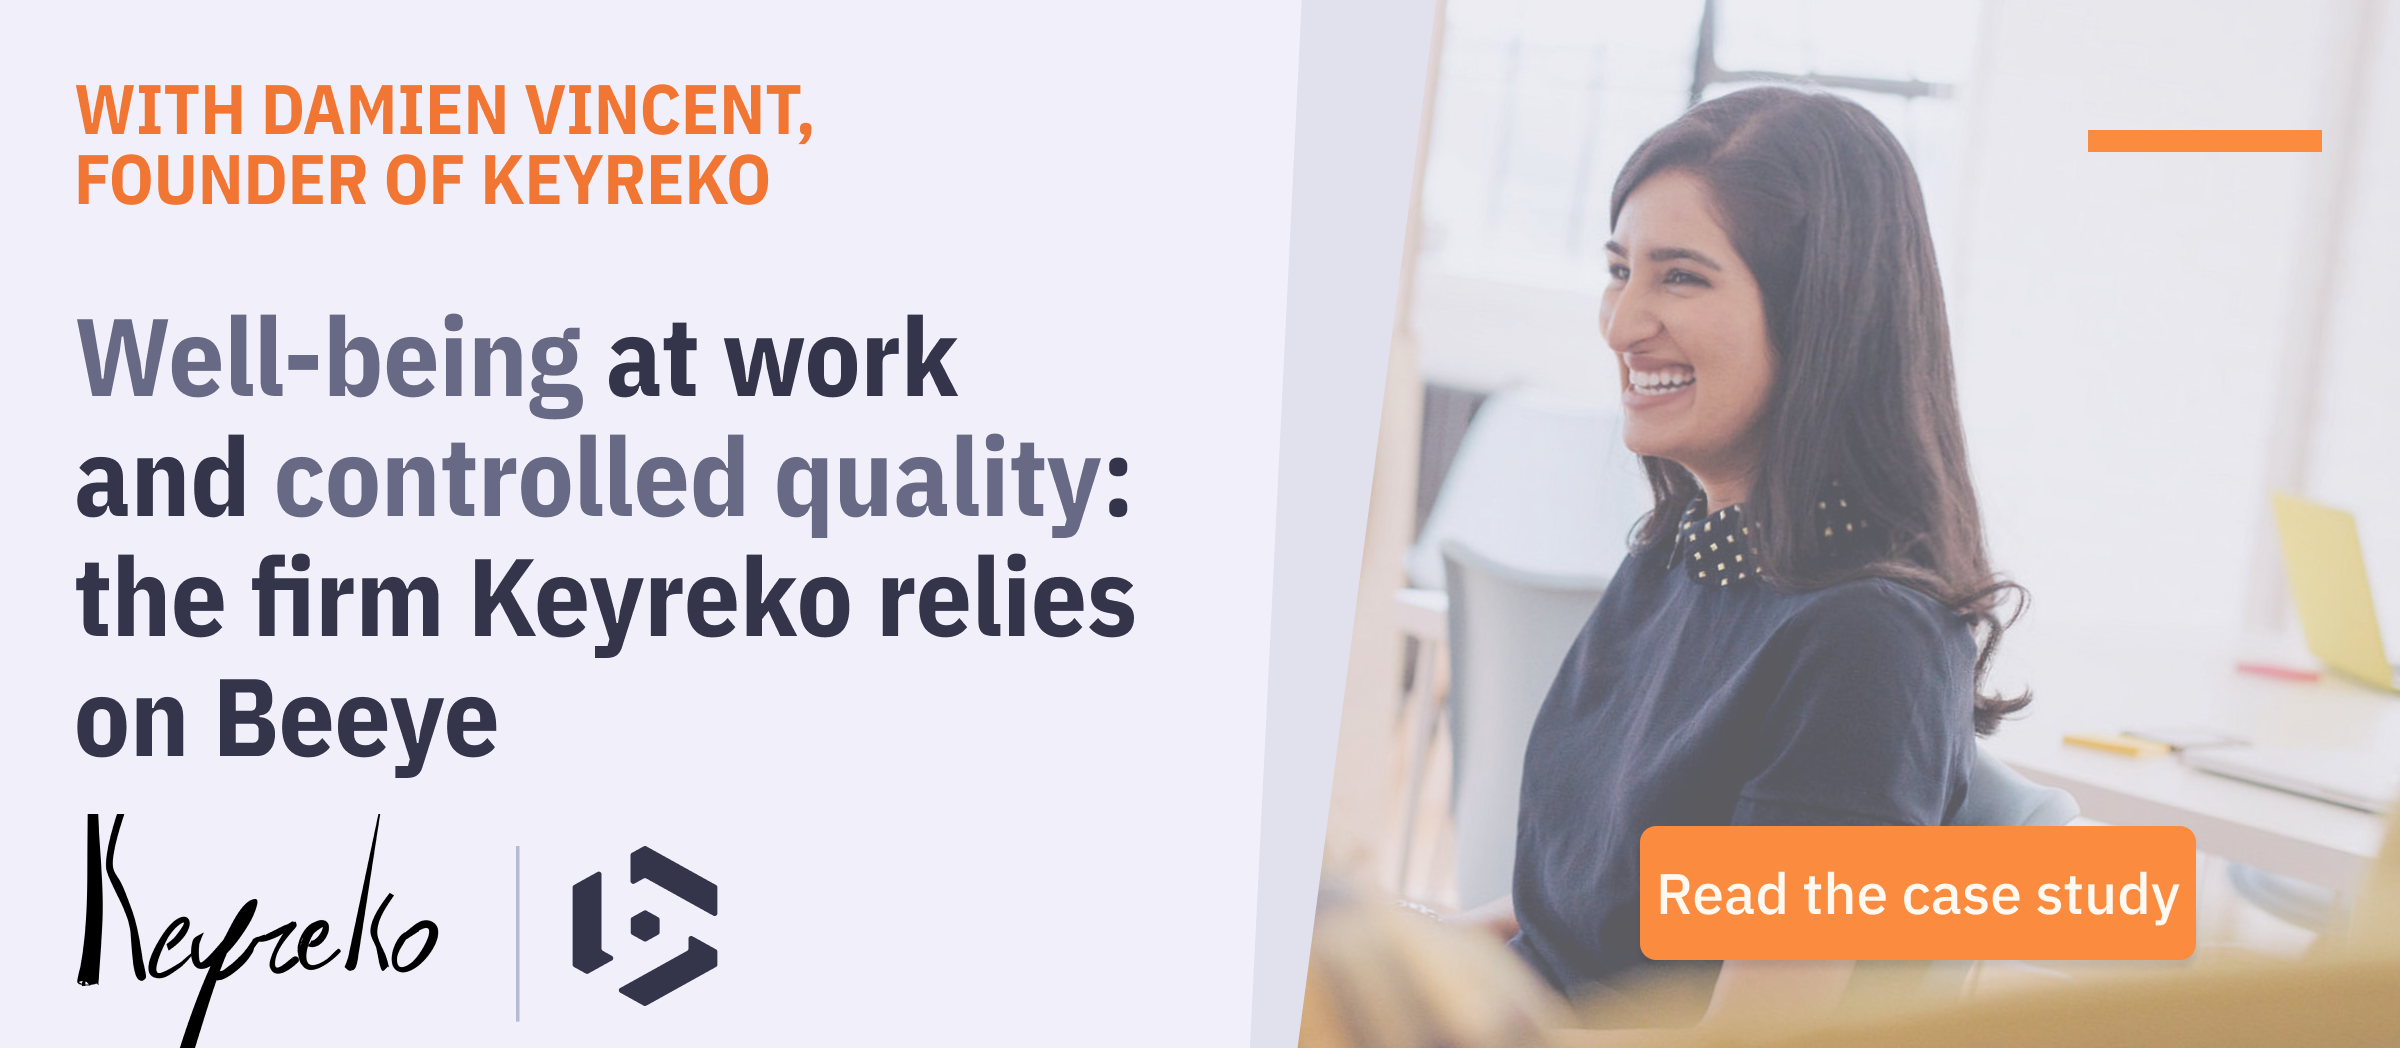 Well-being at work and controlled quality: the firm Keyreko relies on Beeye